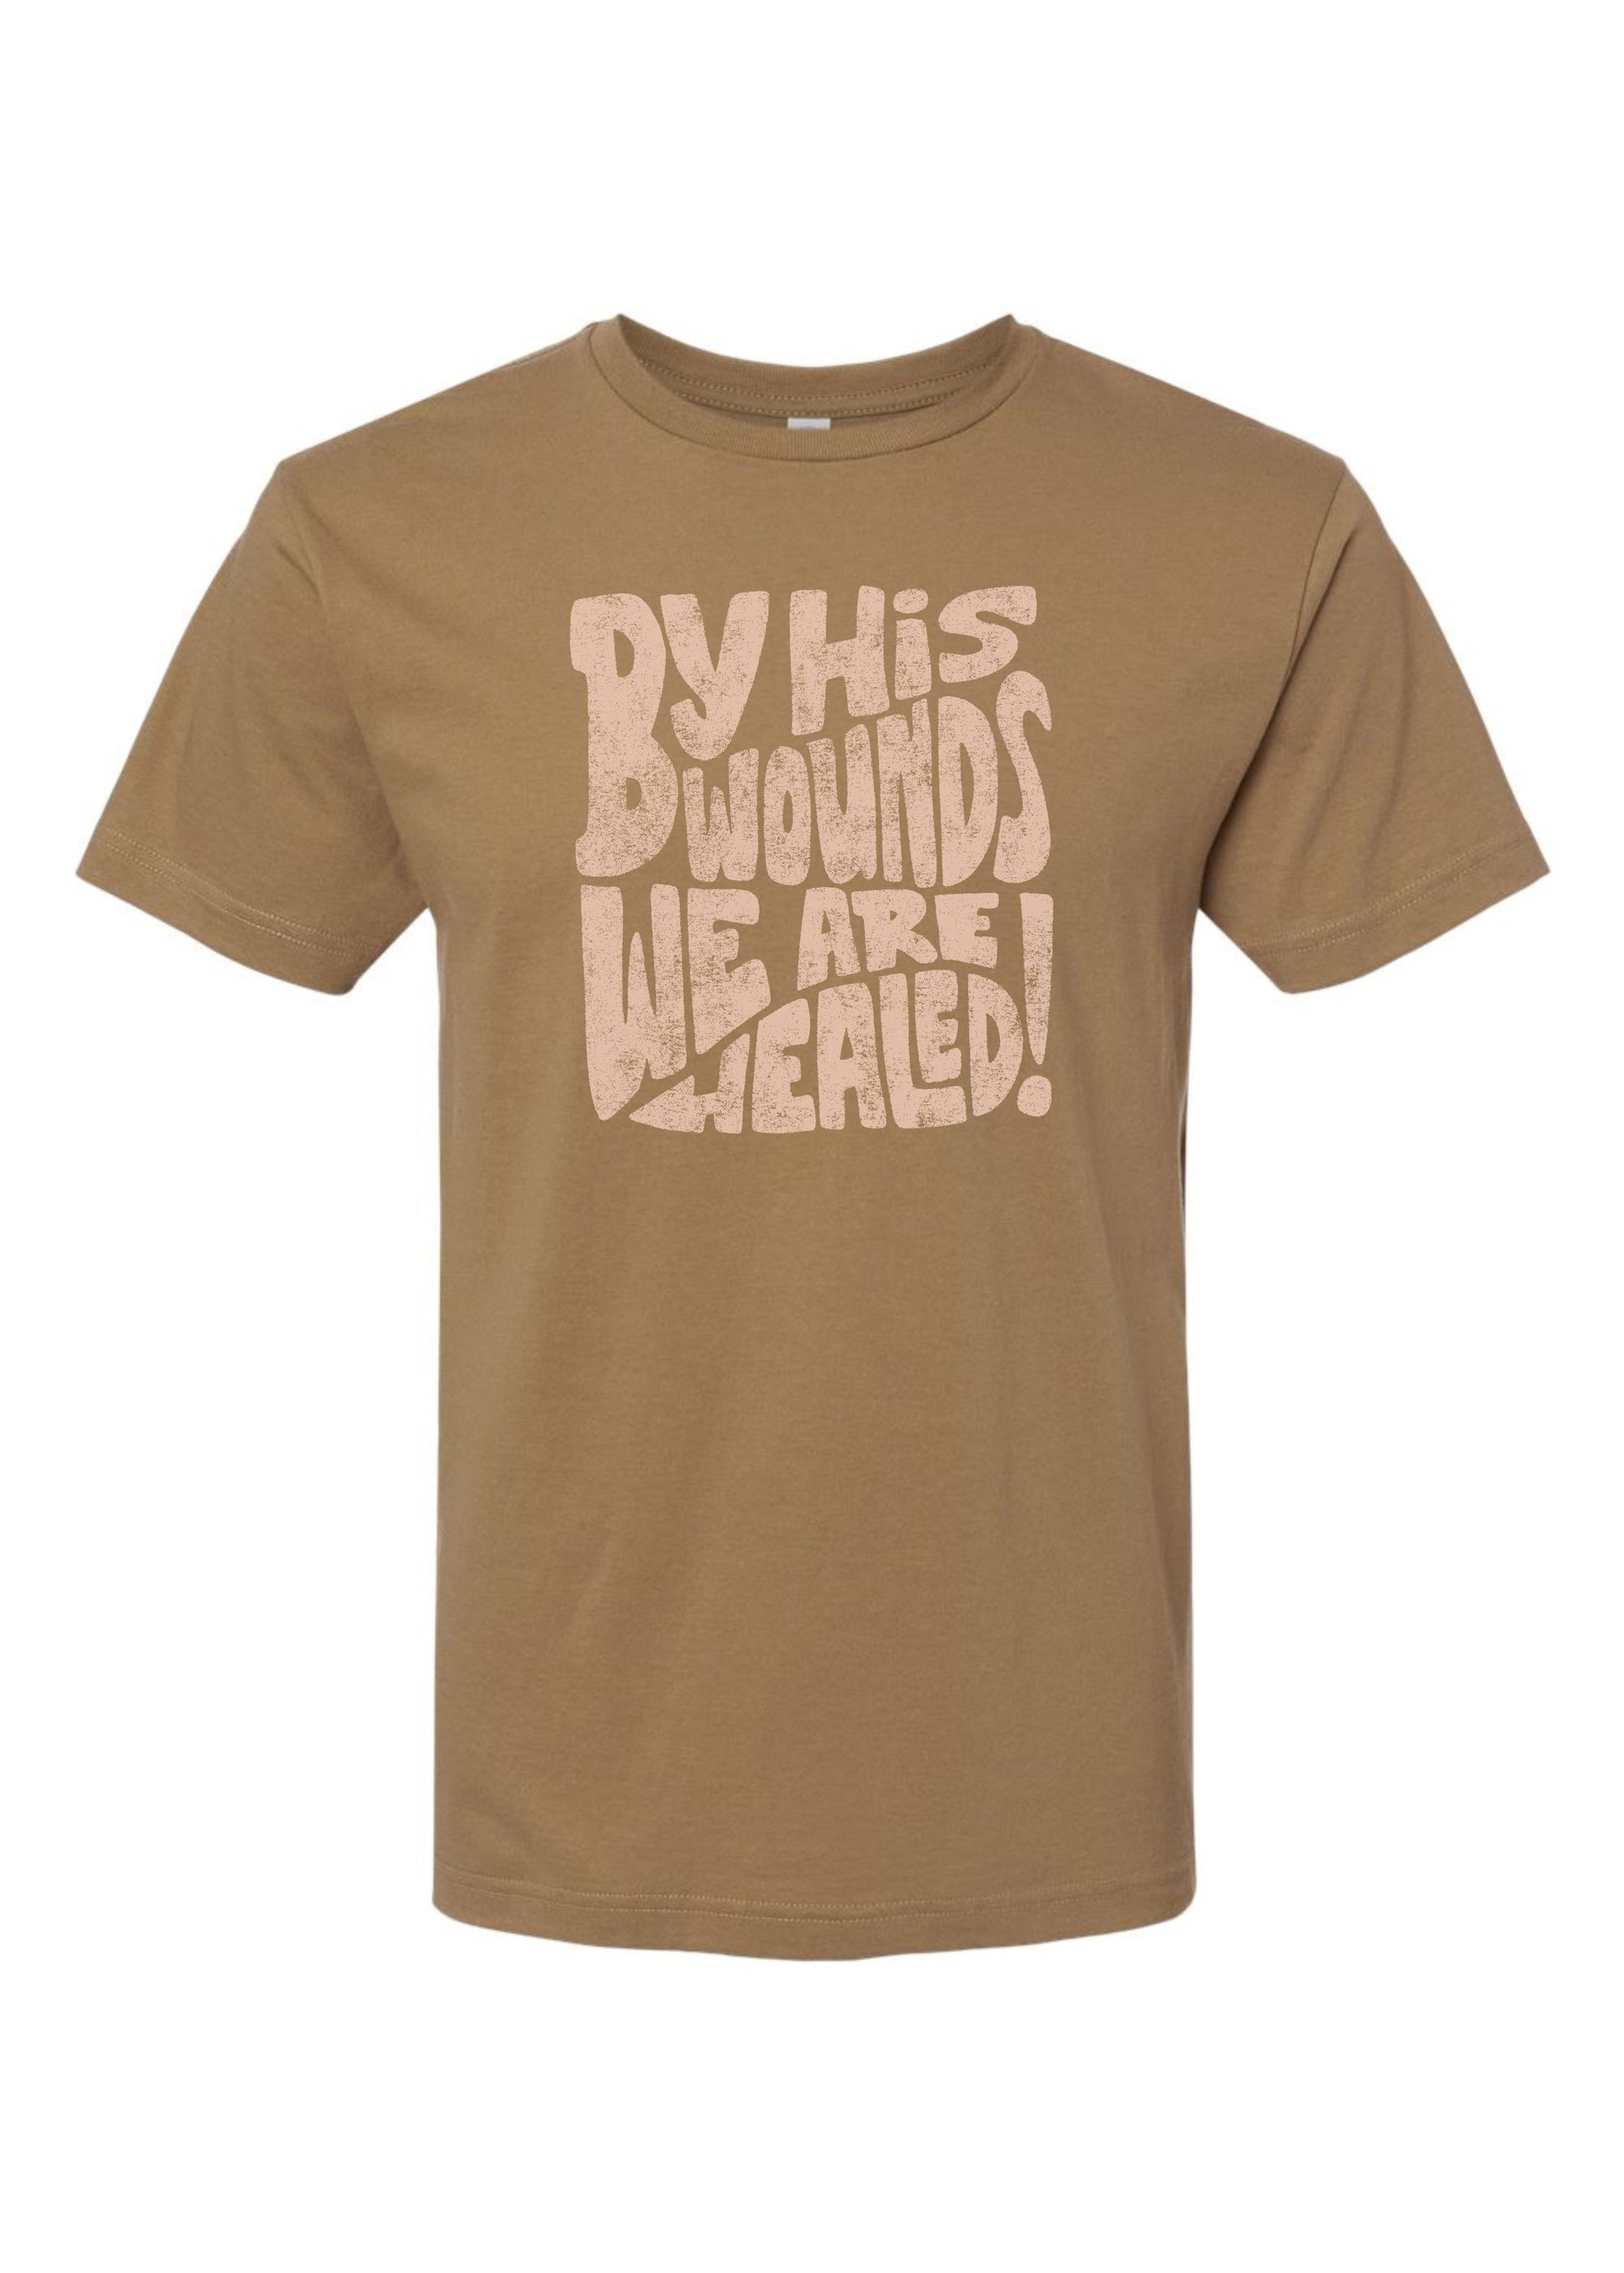 By His Wounds | Tee | Adult-Sister Shirts-Sister Shirts, Cute & Custom Tees for Mama & Littles in Trussville, Alabama.